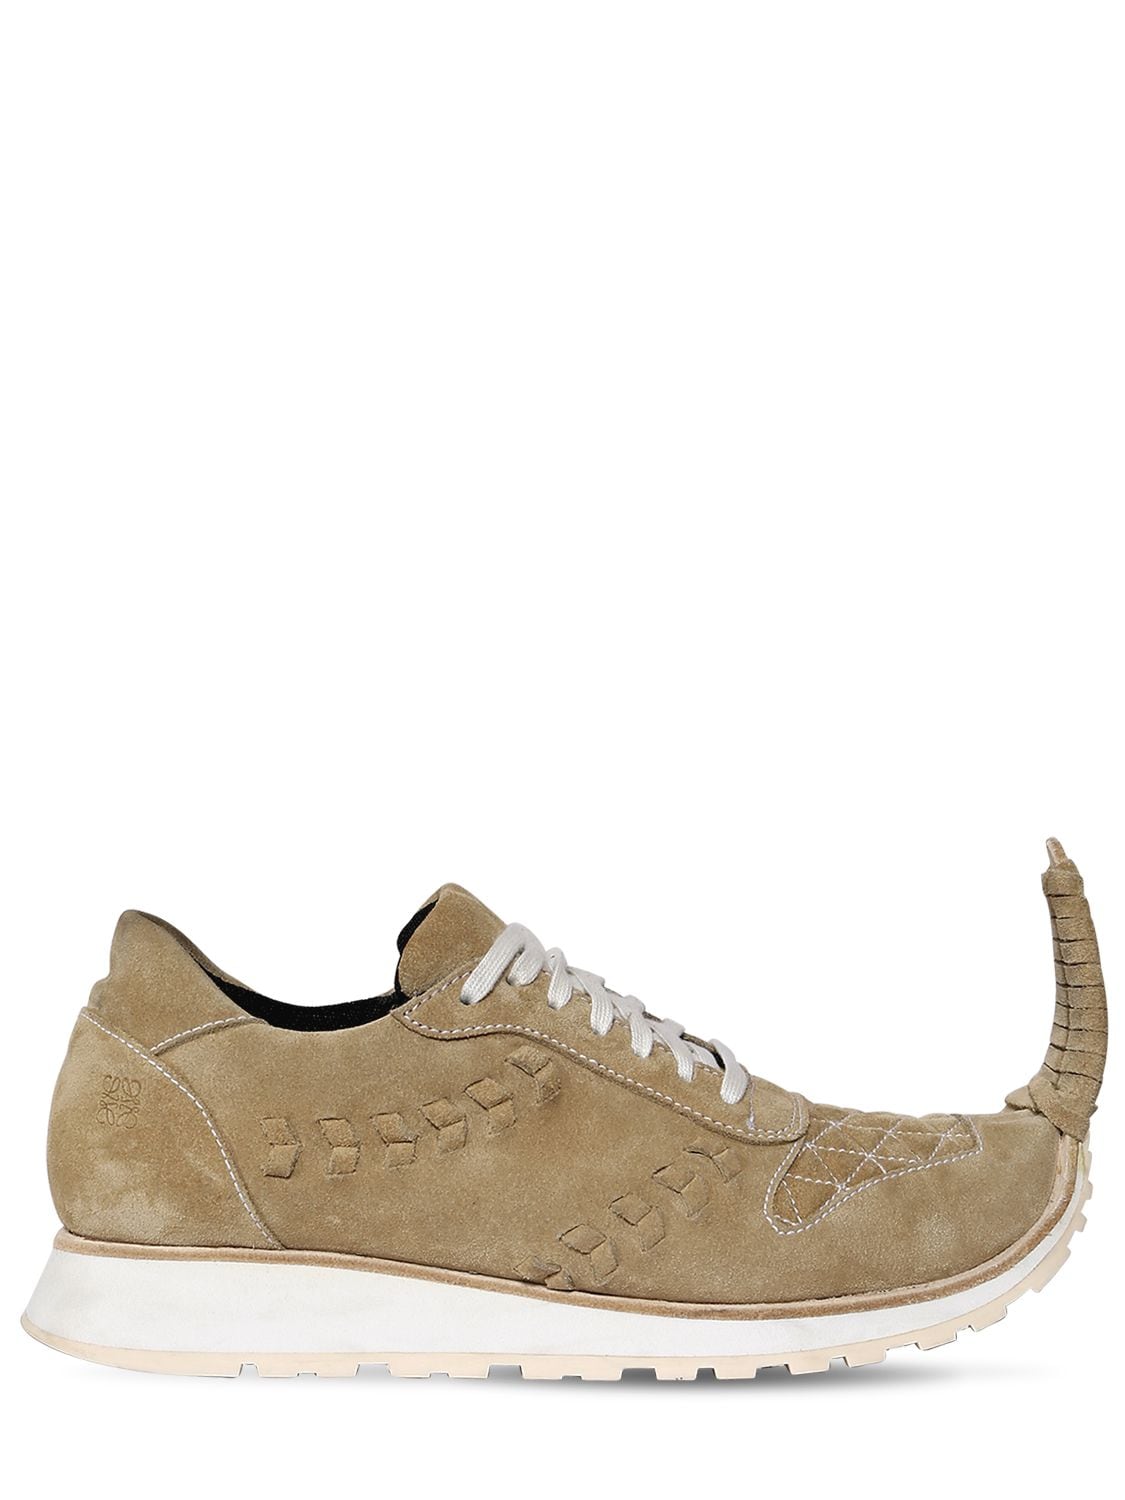 LOEWE 20MM POINTED SUEDE trainers,67ILO5001-ODEzMA2